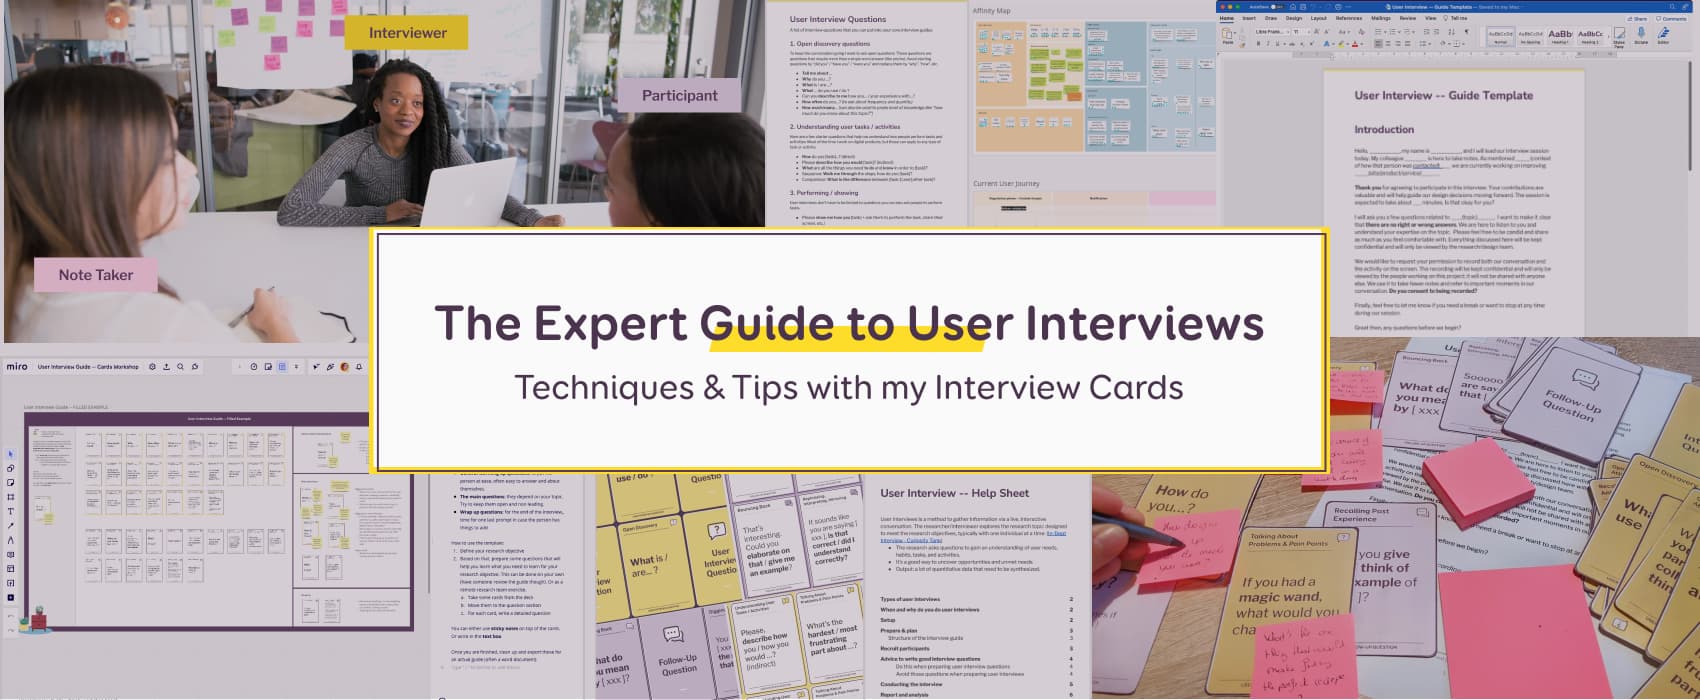 The Expert Guide to User Interviews